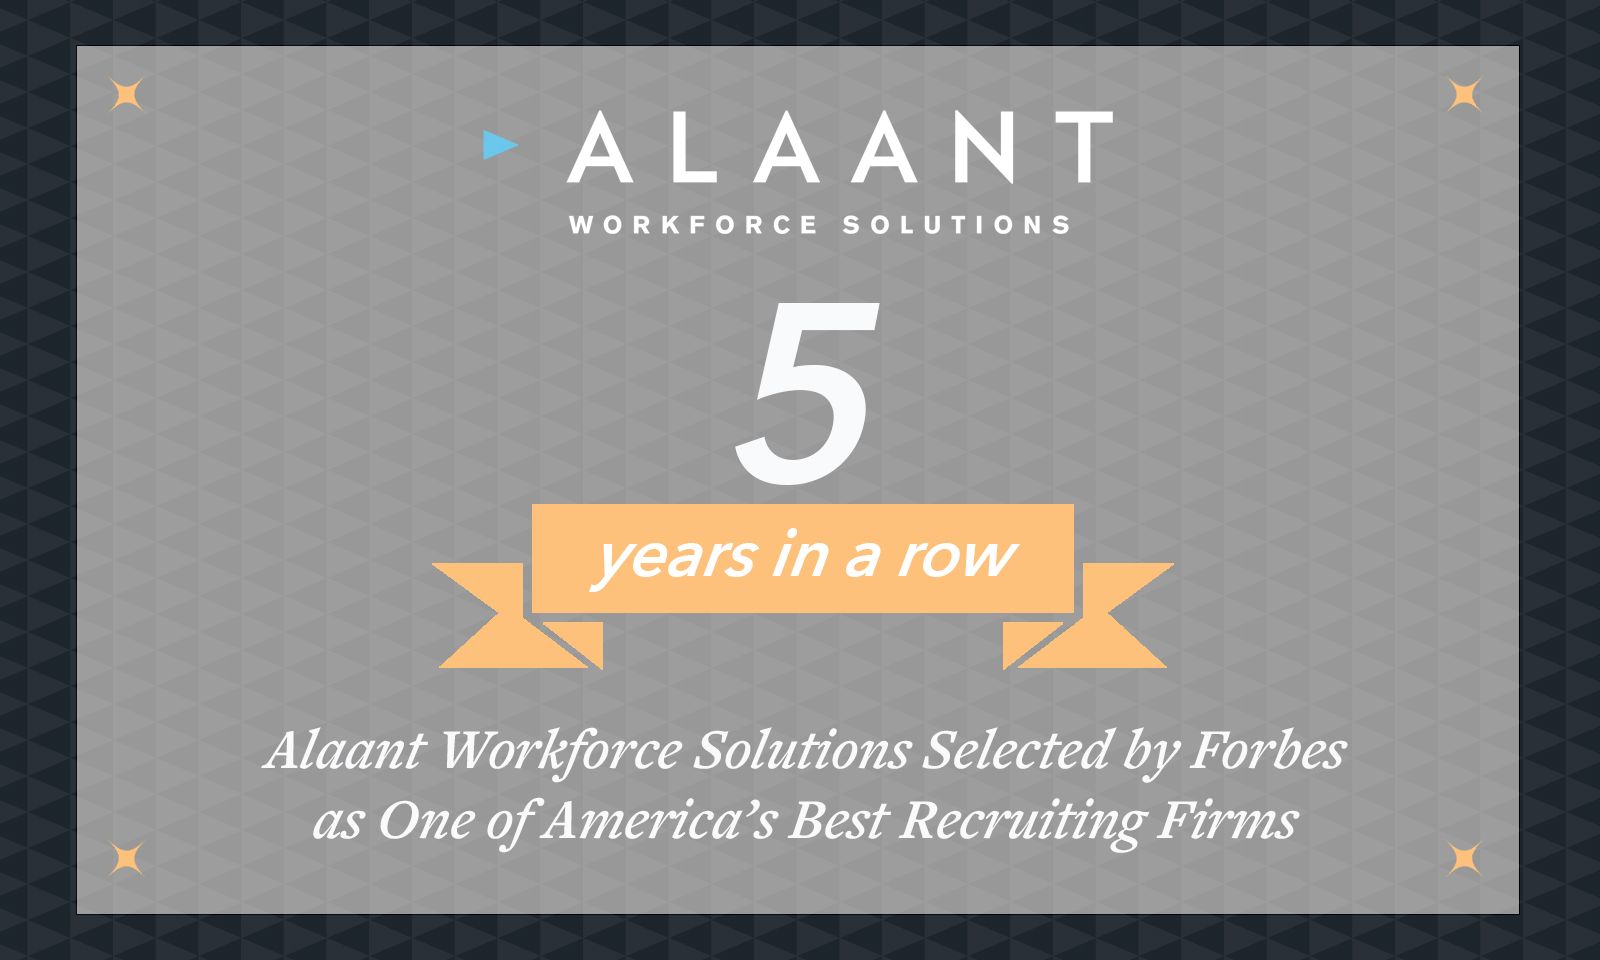 For the Fifth Consecutive Year, Alaant Workforce Solutions is Named by Forbes as One of America’s Best Recruiting Firms